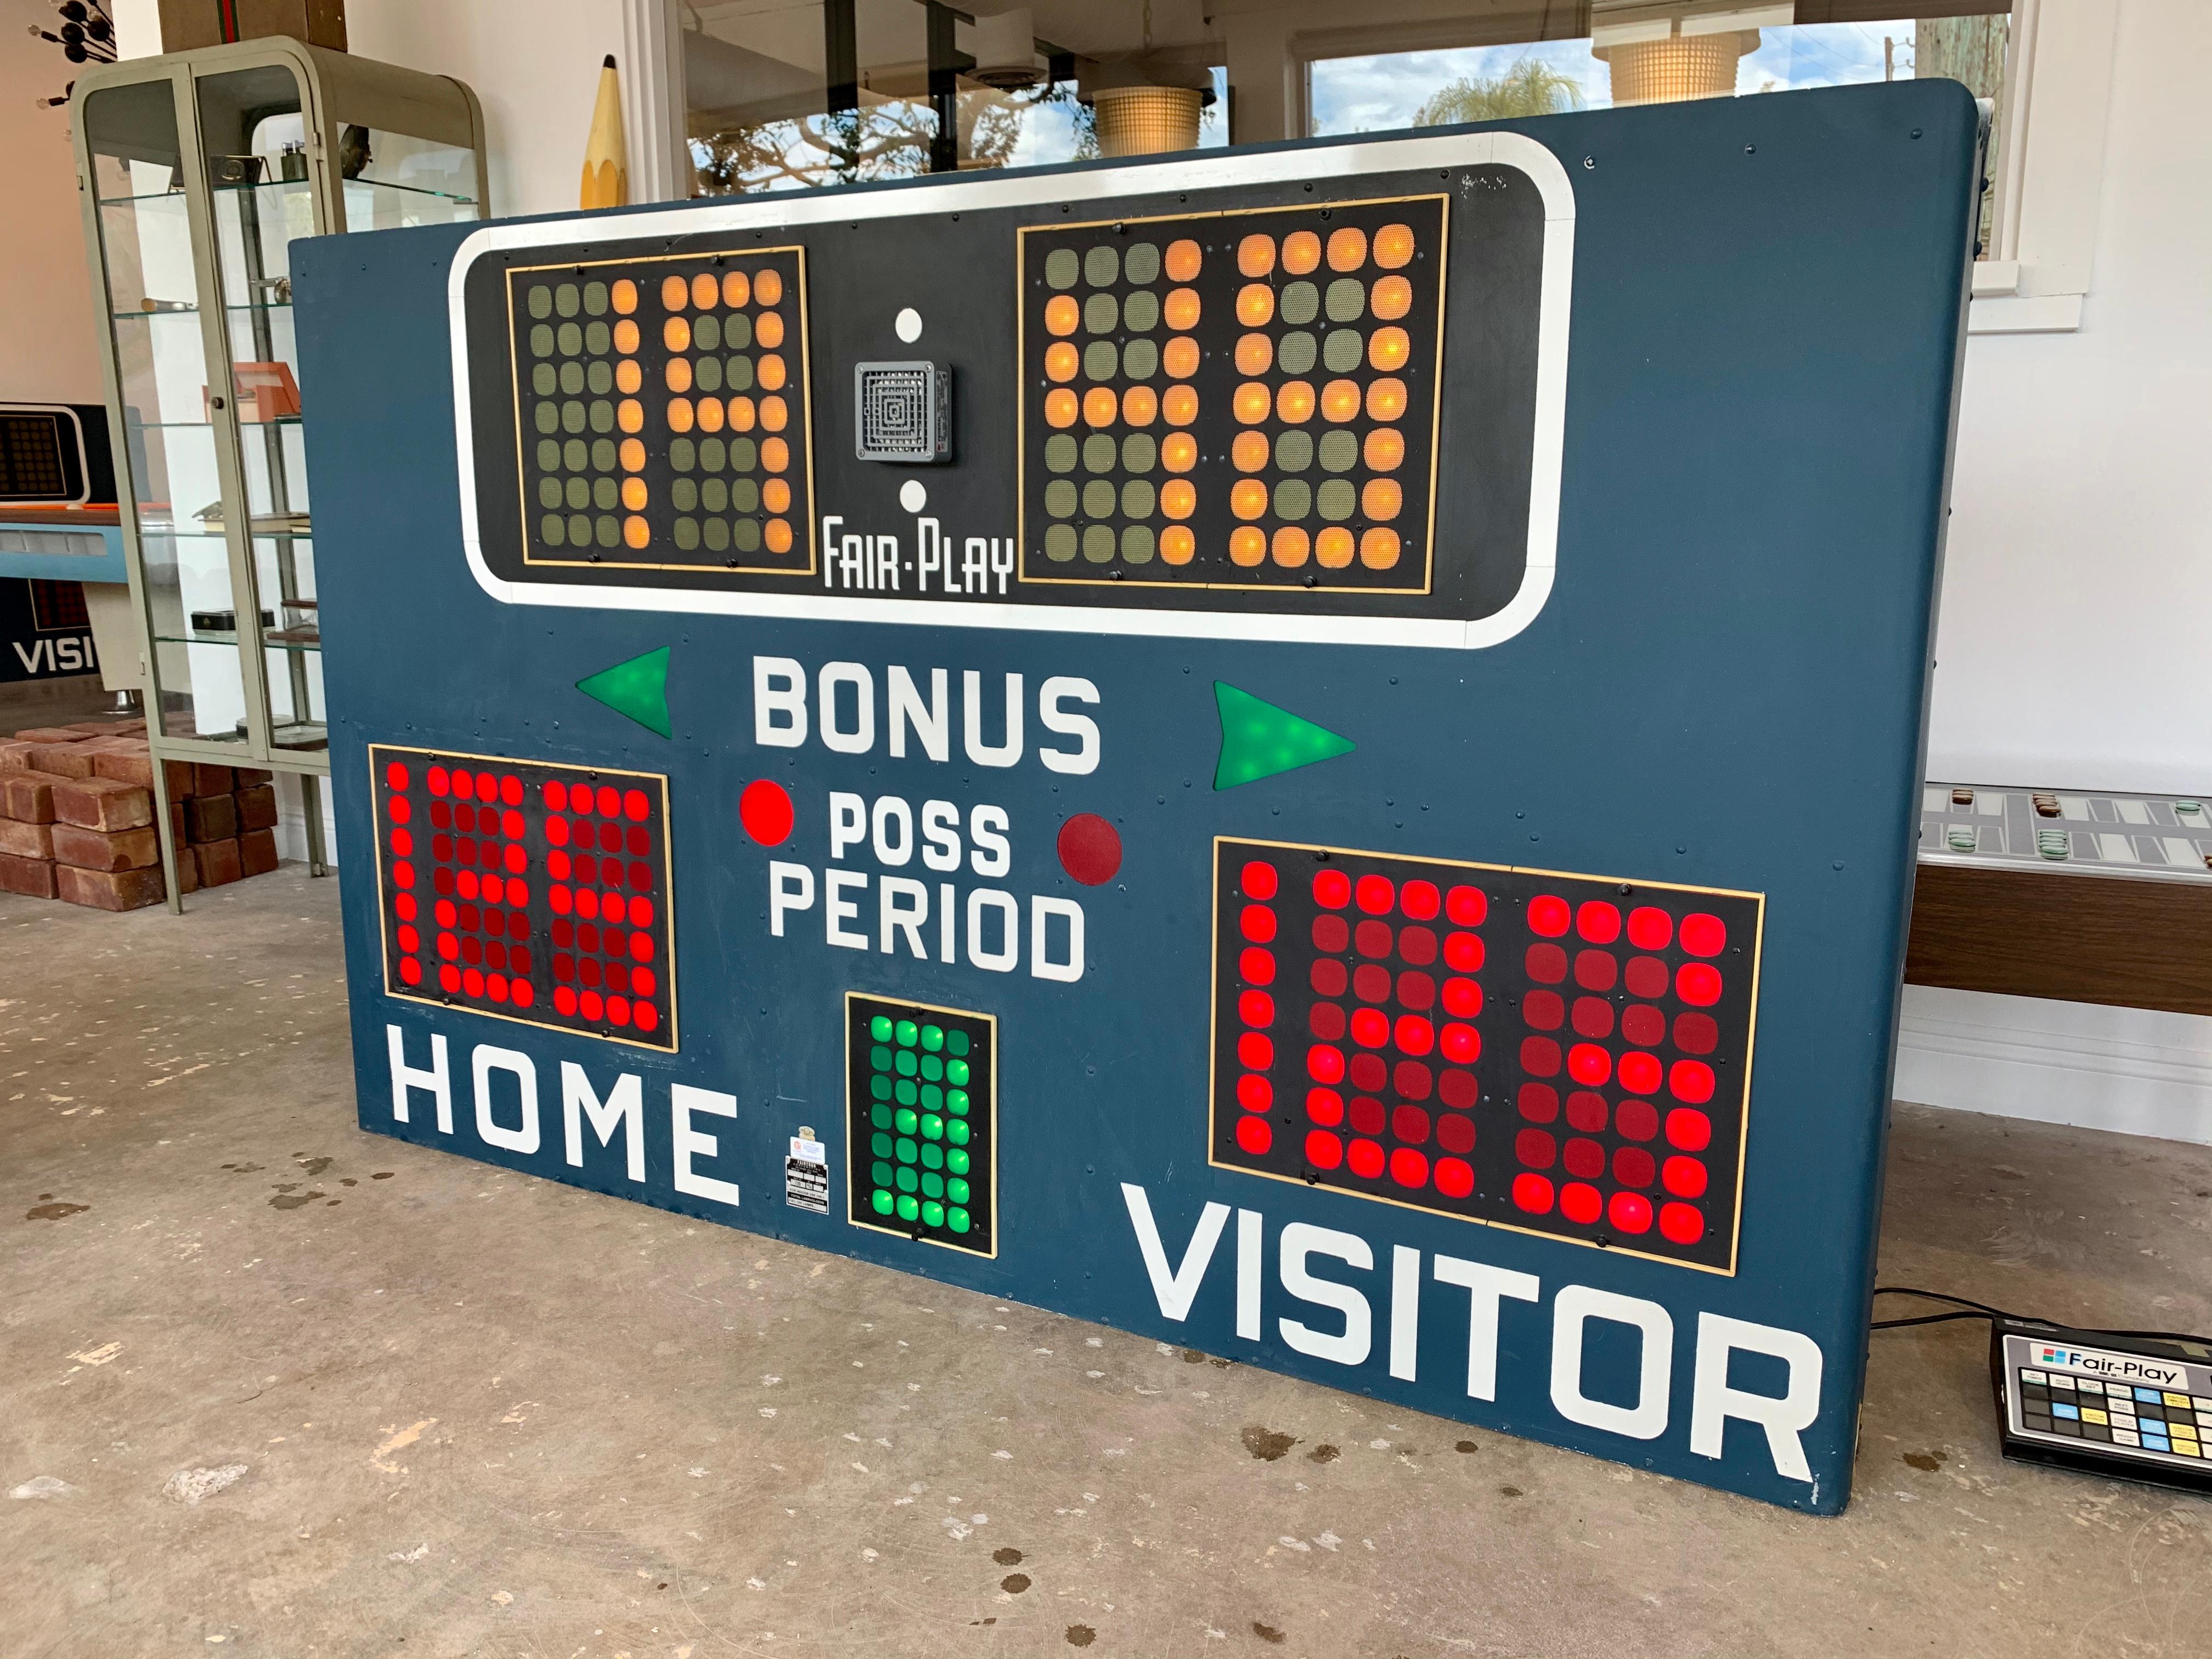 Two great matching vintage basketball scoreboards by Fair Play, made in the 1970s. In perfect working order with controller to adjust score, running shot clock etc. and working horn. Very fun piece of art for your home or commercial space. Taken